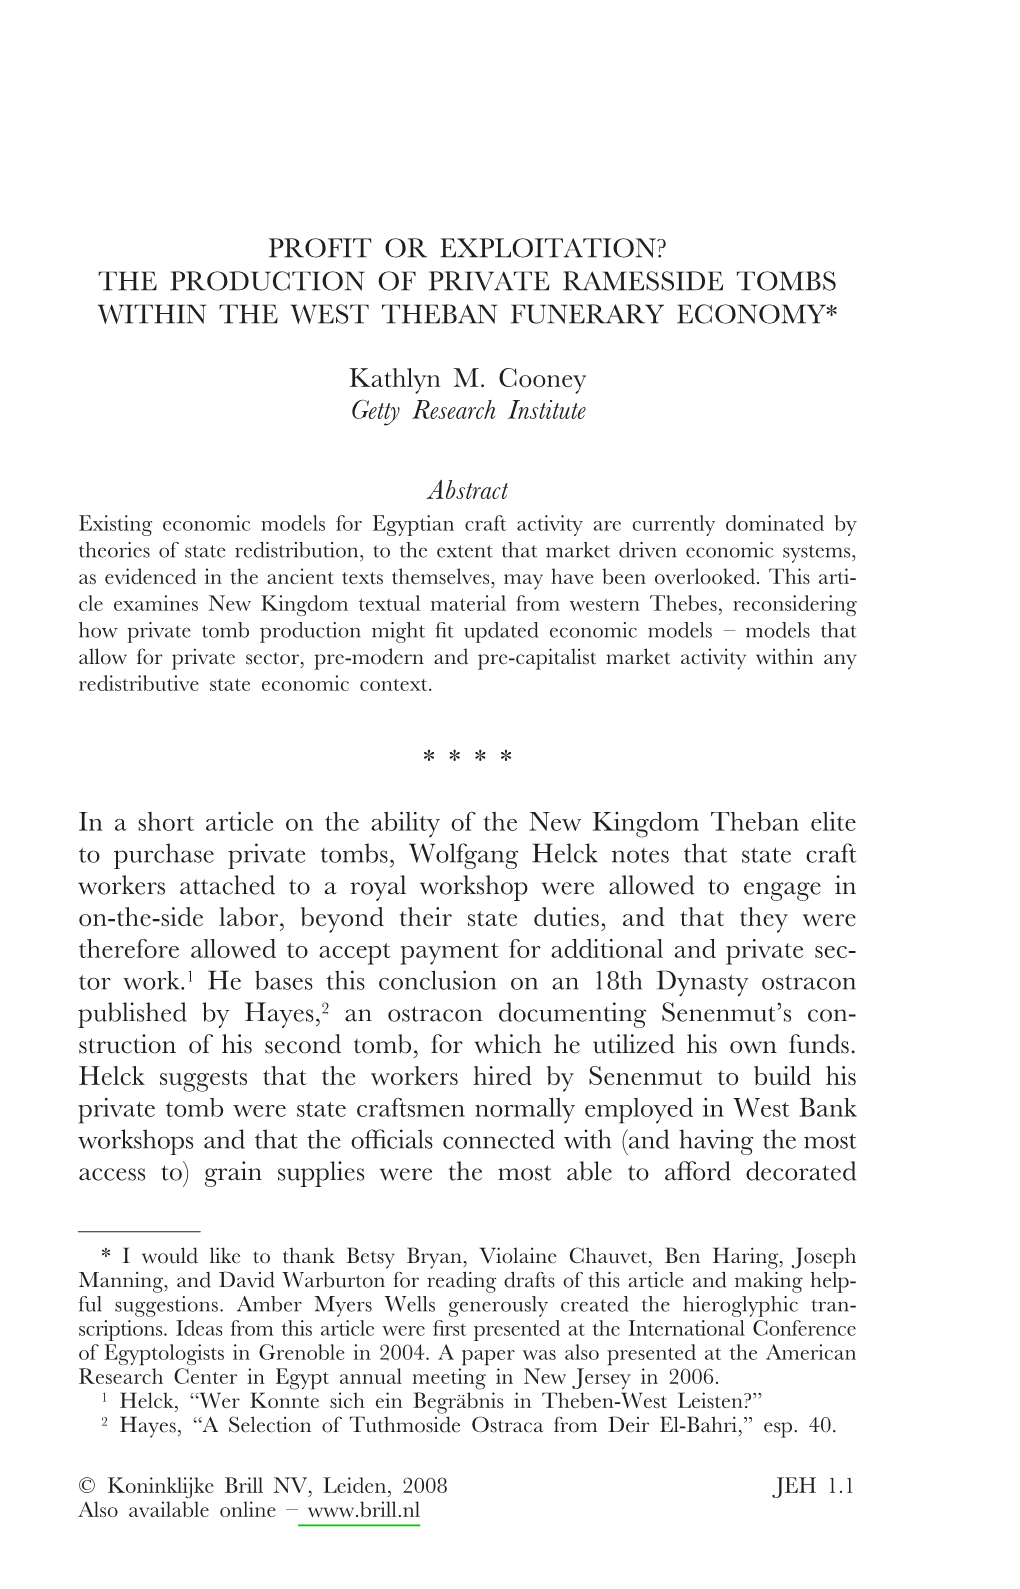 The Production of Private Ramesside Tombs Within the West Theban Funerary Economy*